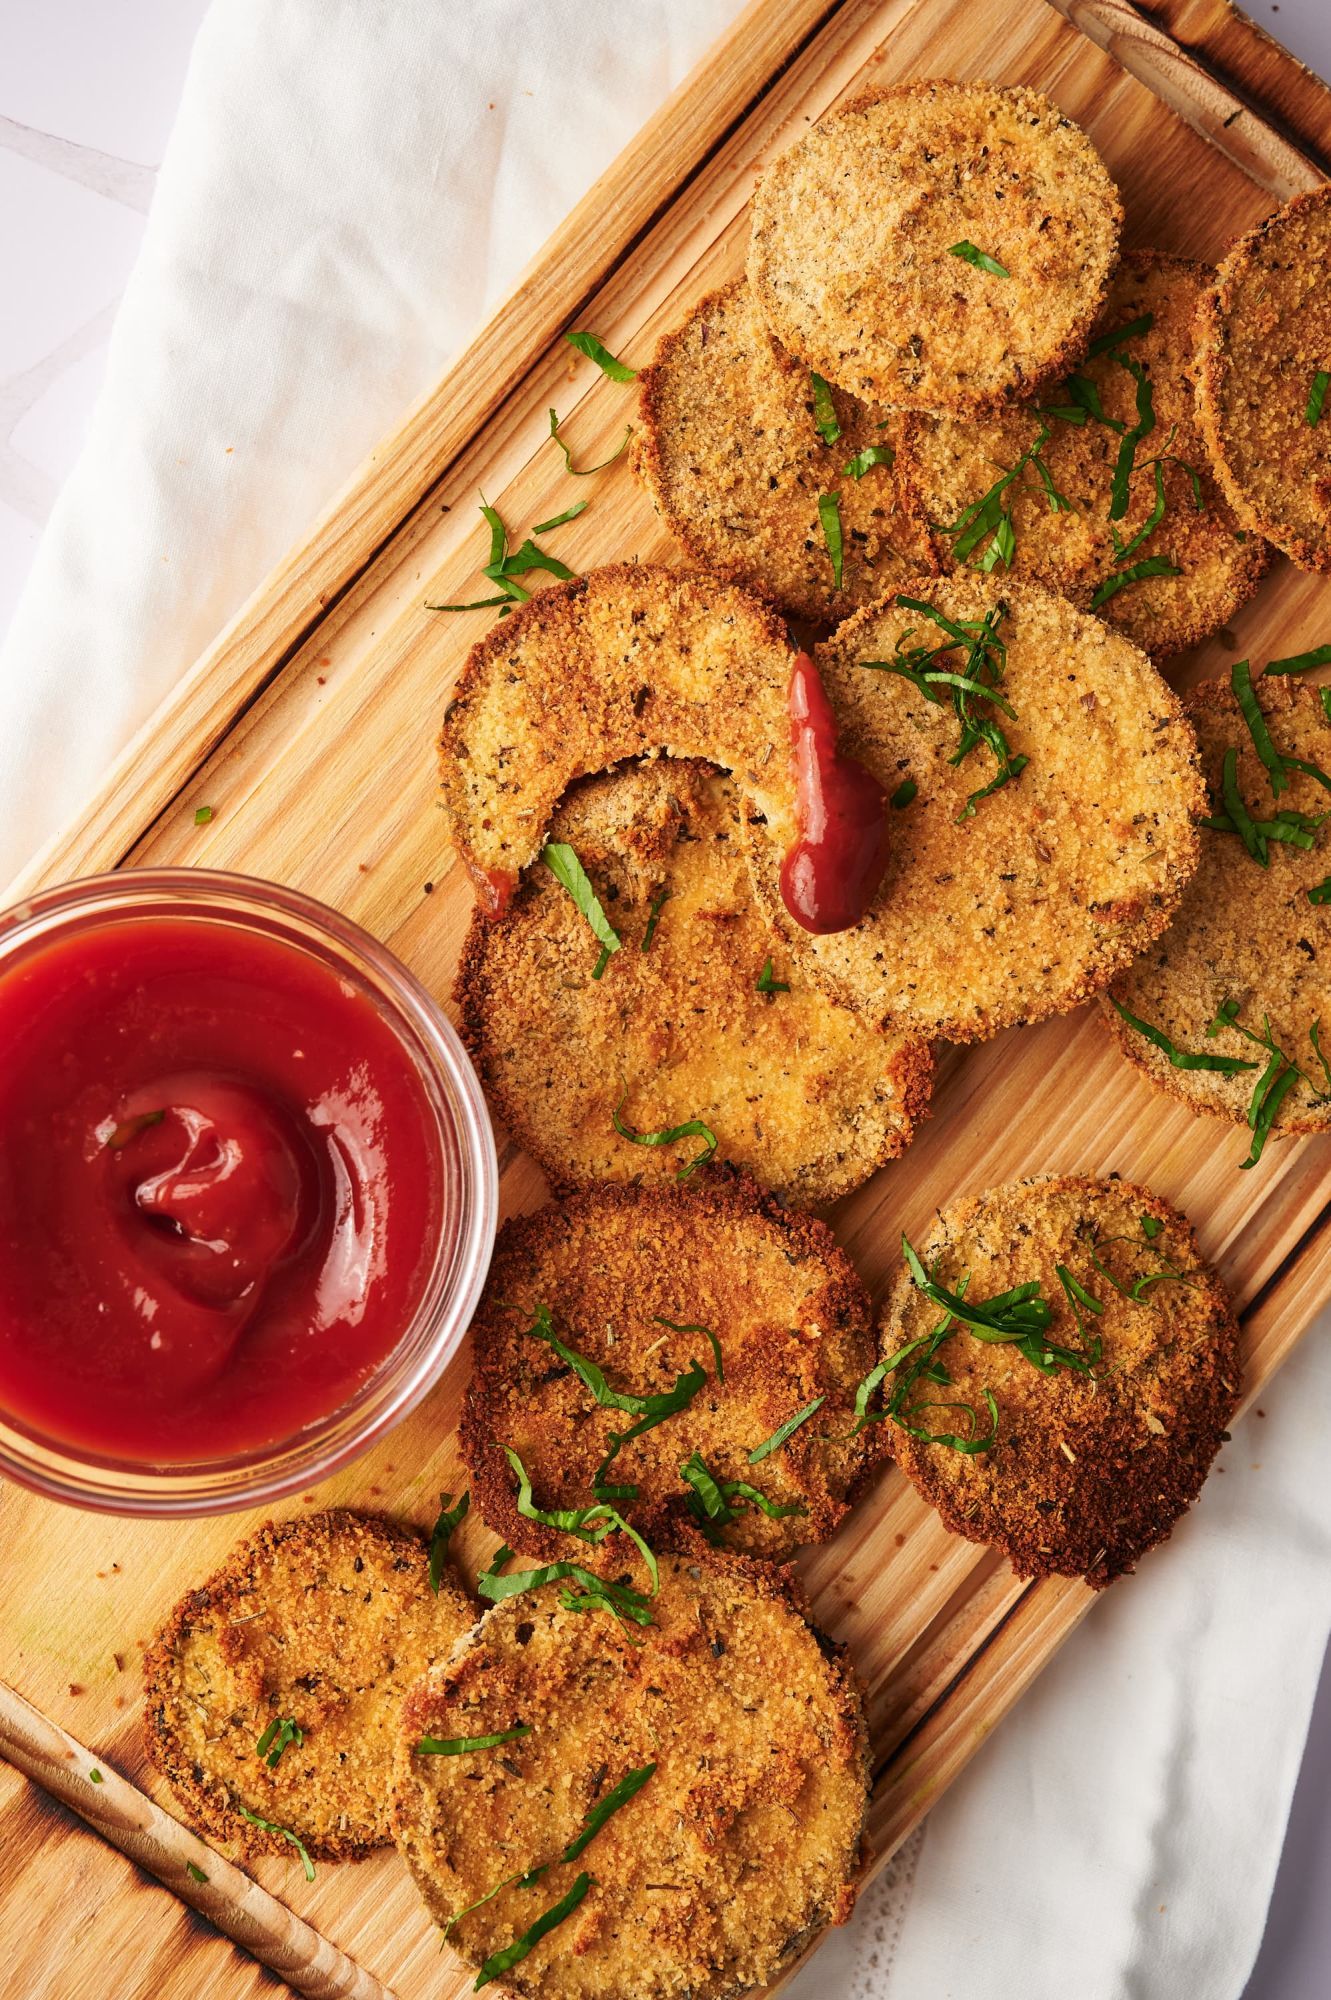 Eggplant cutlets with breading on a cutting board with tomato sauce for dipping.